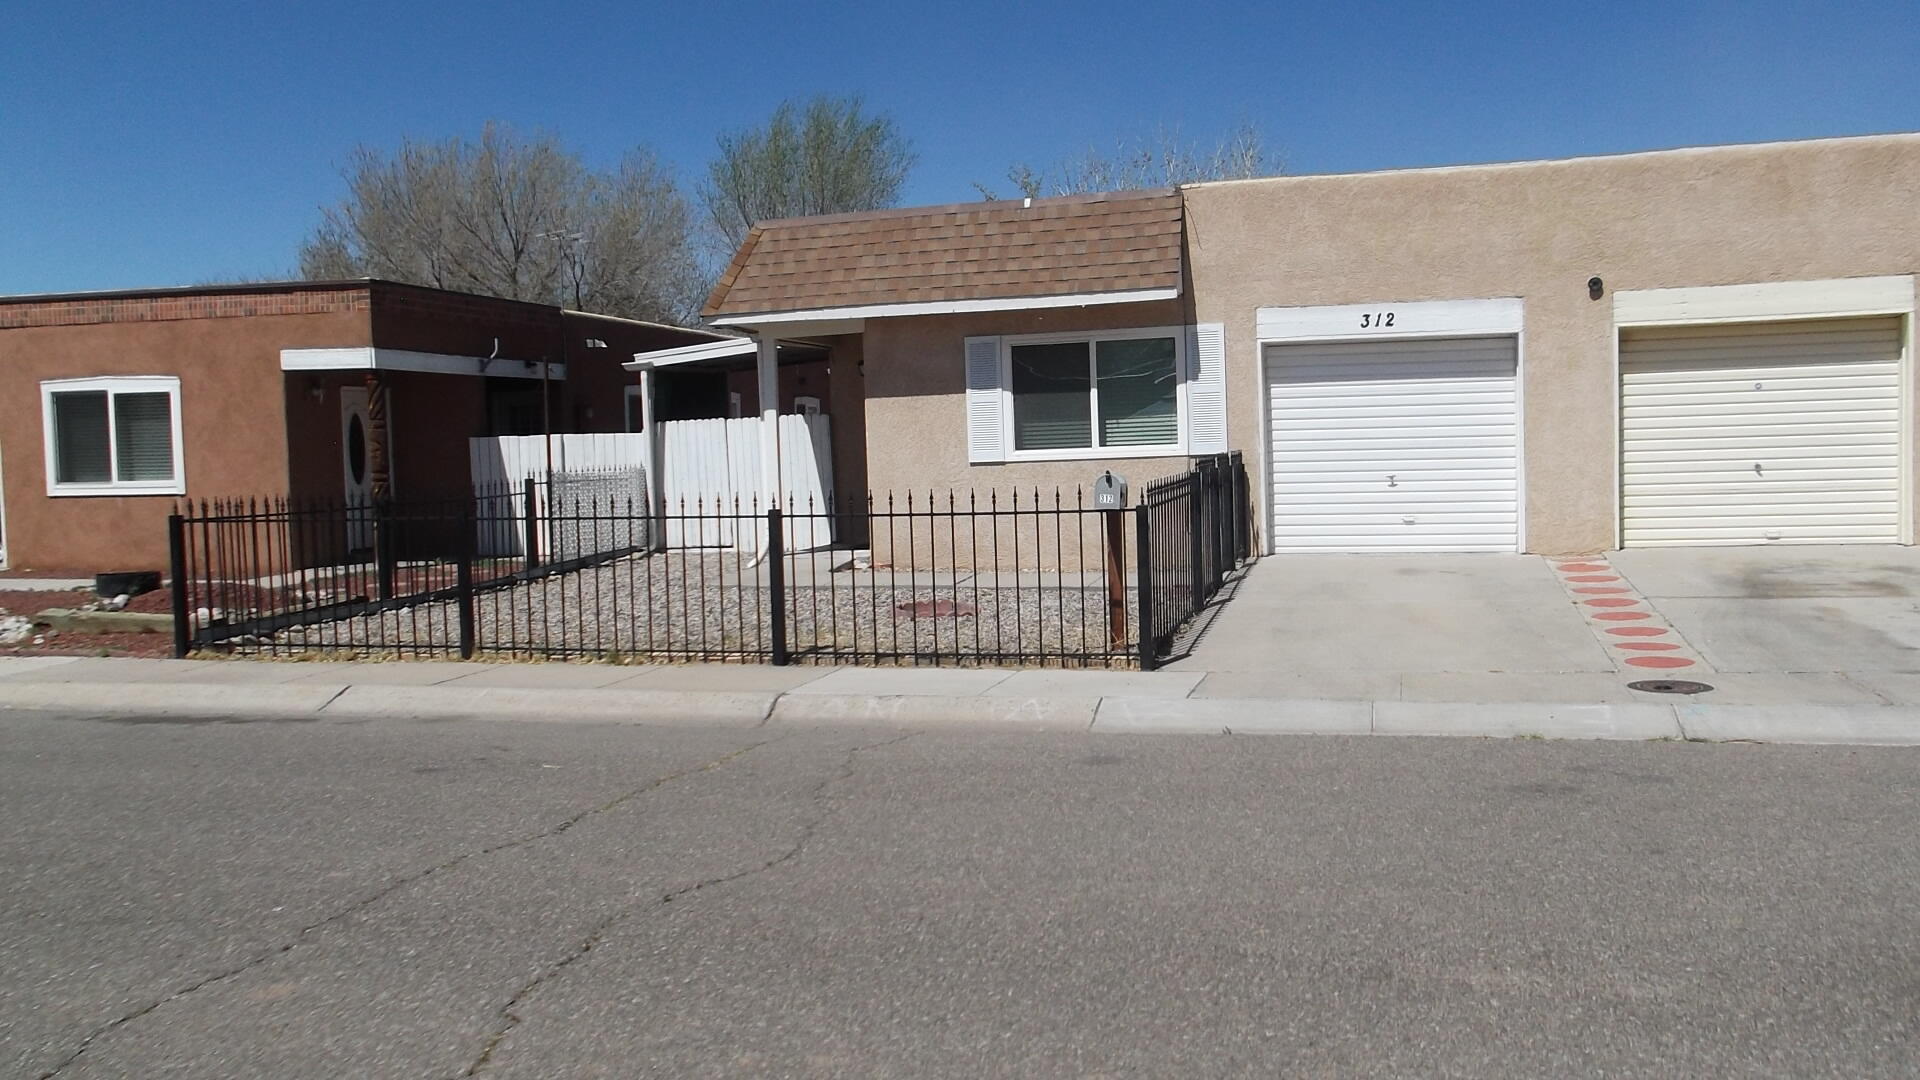 Lovely townhouse in the center of Los Lunas, close to the transportation center, schools, shopping in quiet neighborhood. A must to see, won't last long. Property has completely been remodeled , new TPO roof, paint and much more.